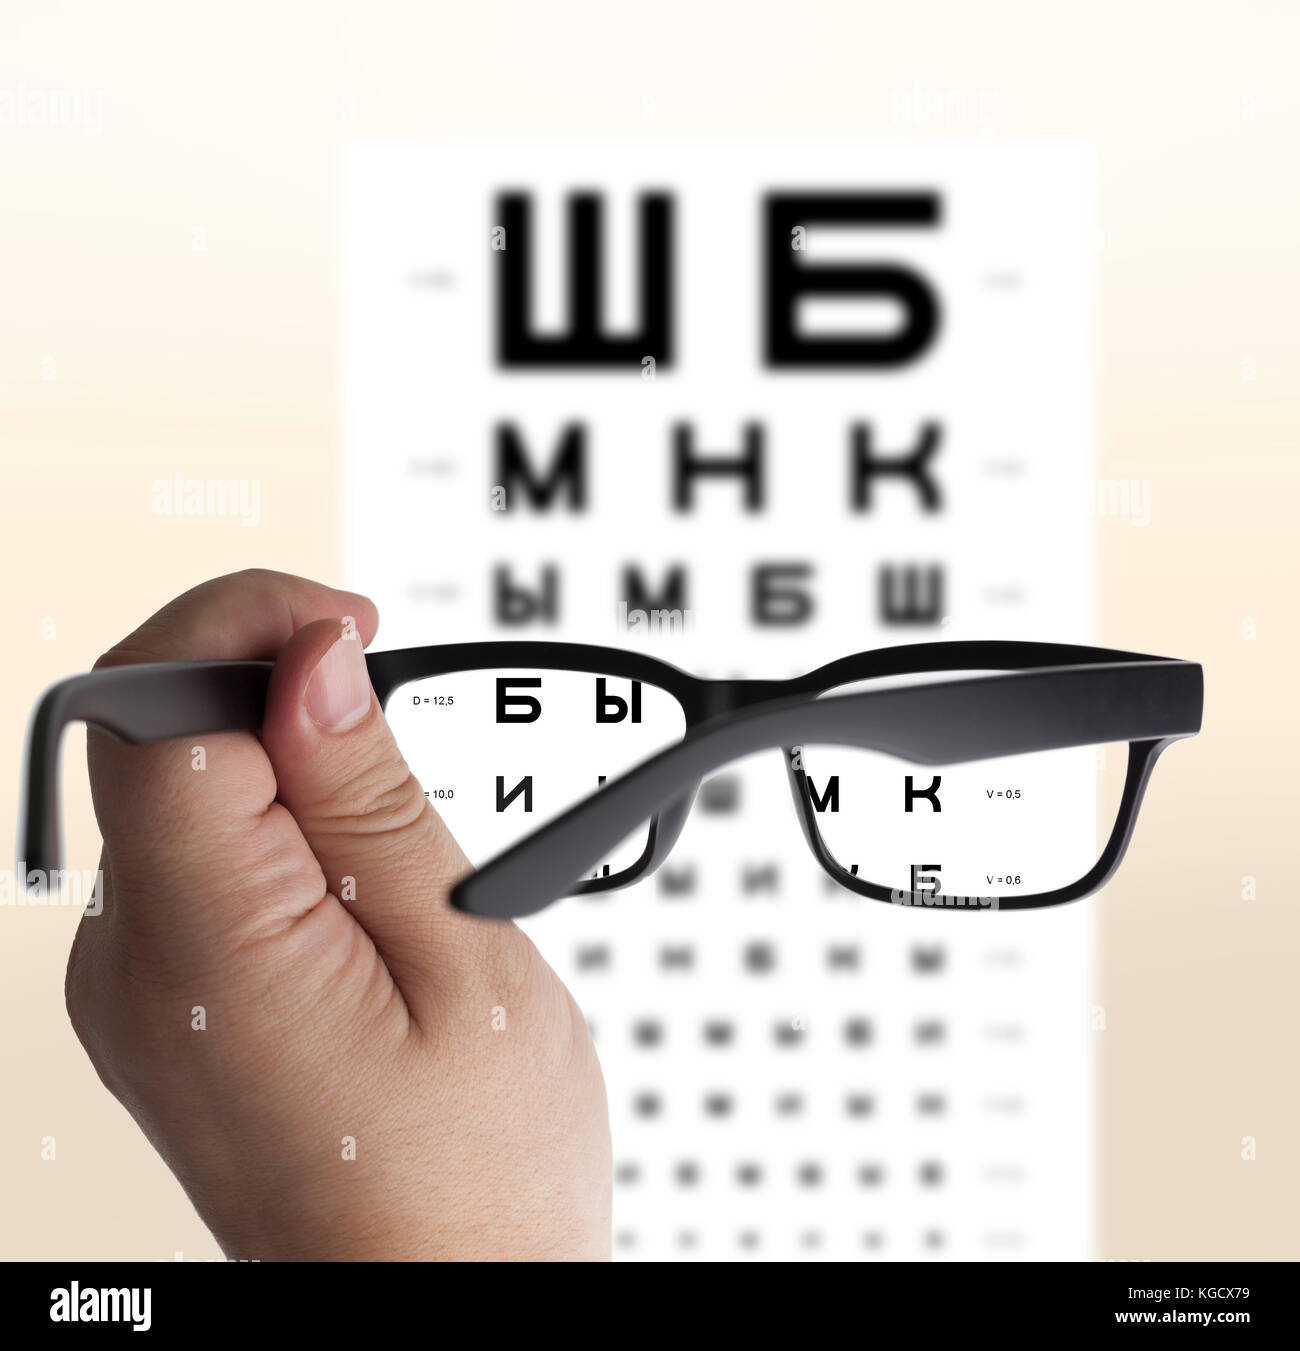 Eyeglasses in hand for eyesight Russian/Cyrillic test chart background, isolated Stock Photo